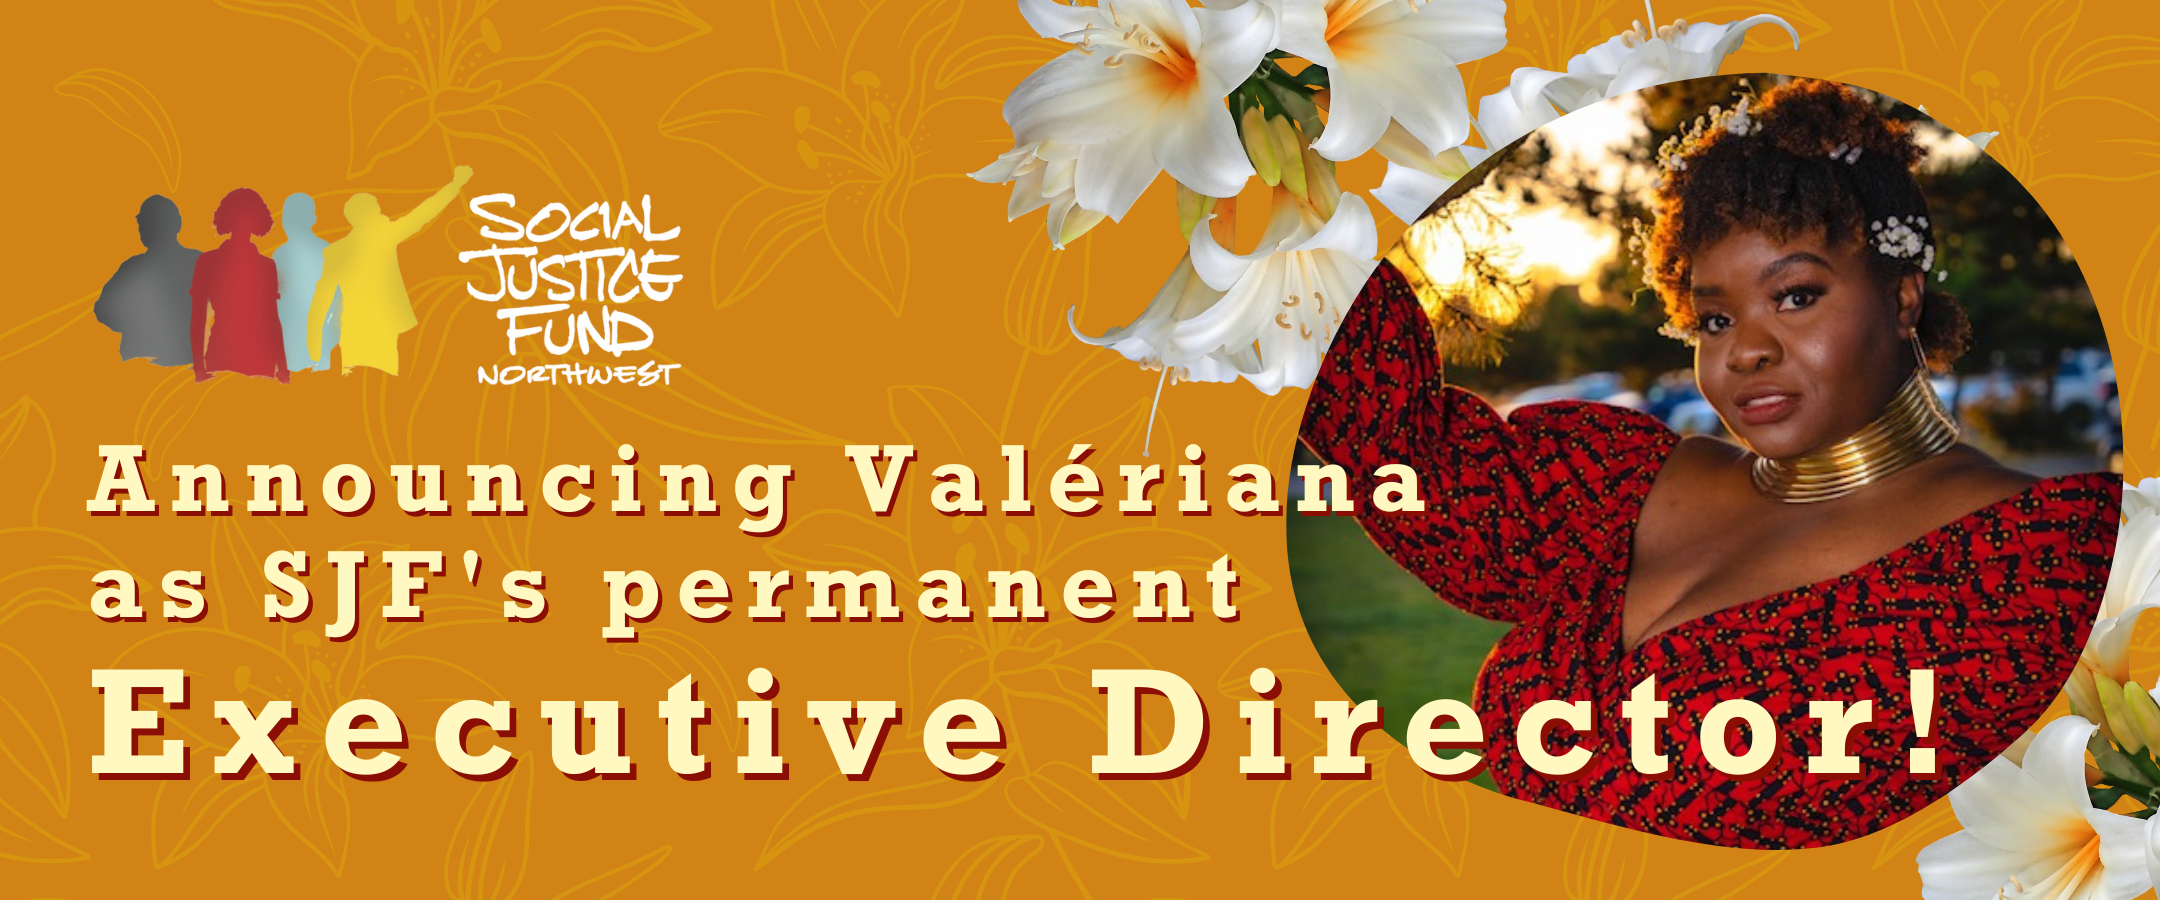 Orange banner with light yellow lily background. Text reads Announcing Valeriana as SJFs permanent Executive Director. There is a picture of Valeriana a Black woman wearing a red top with flowers in her hair.